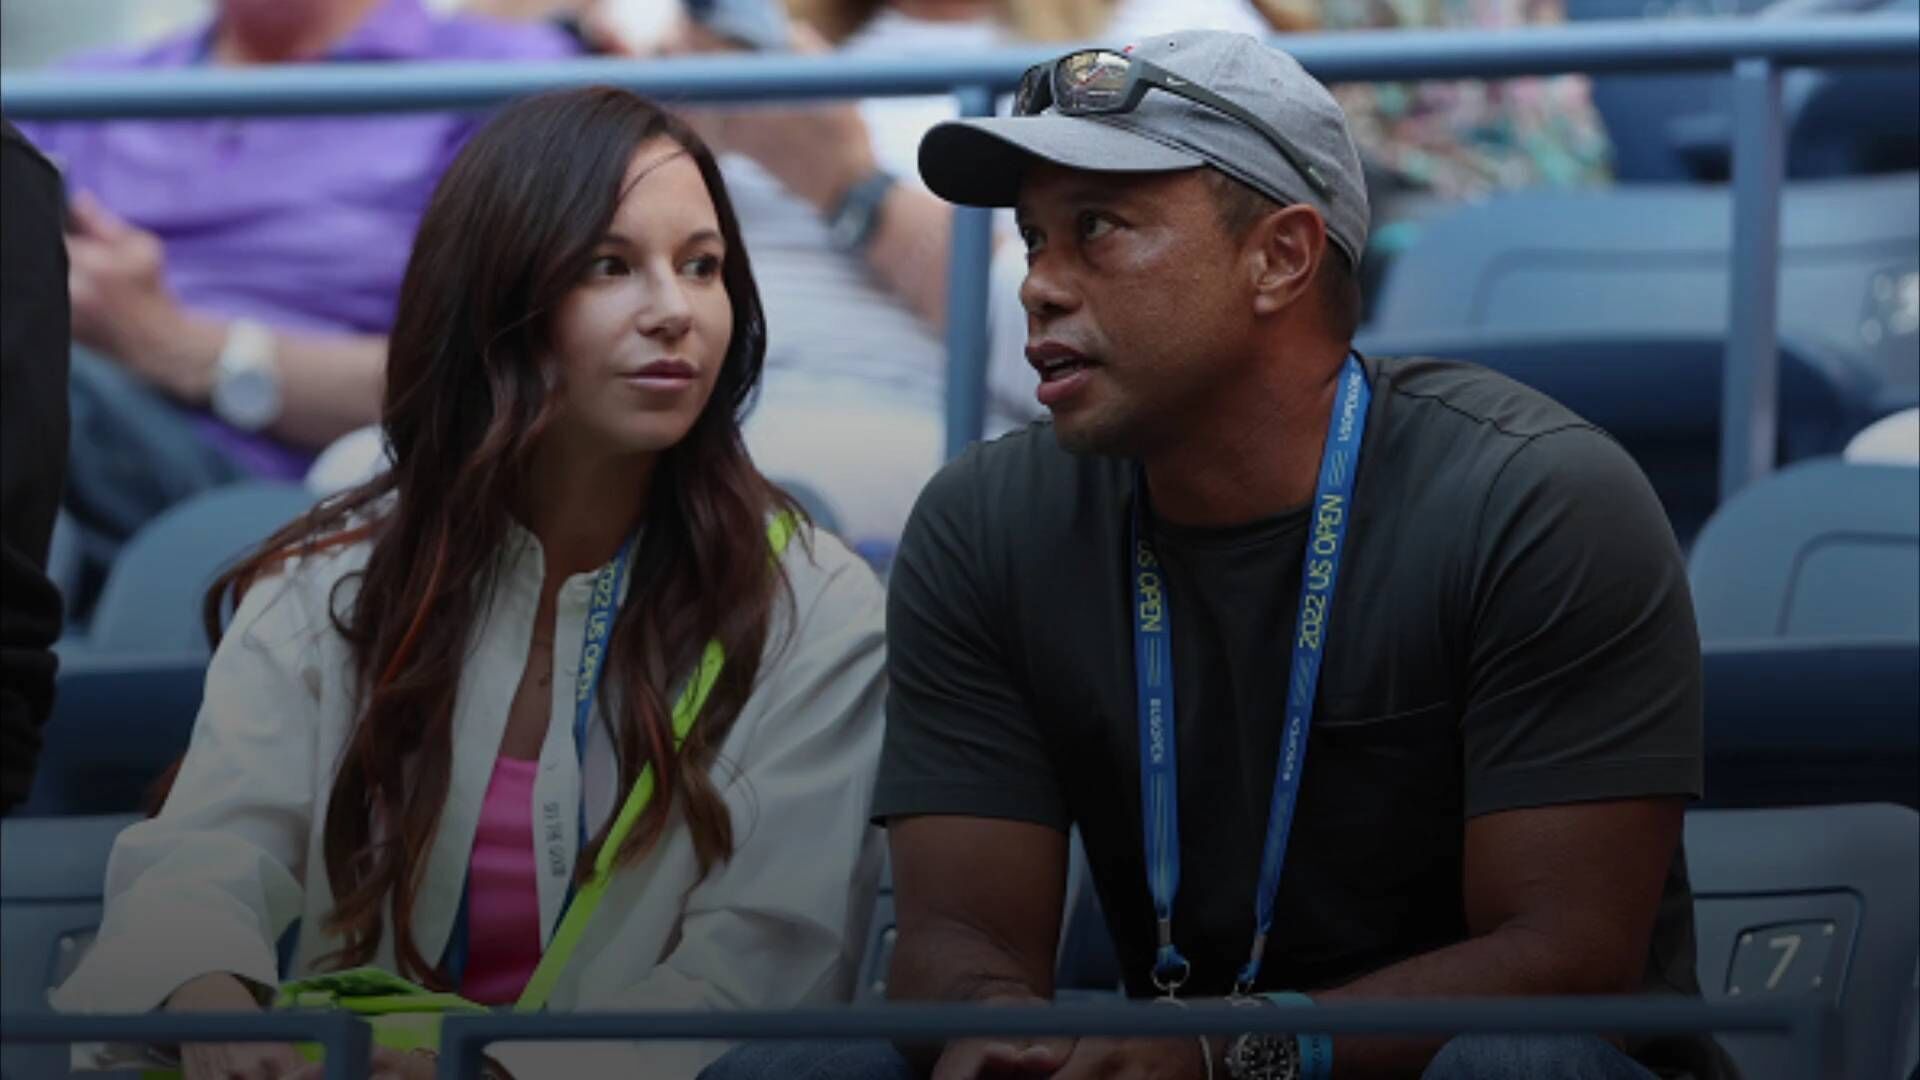 Former girlfriend of Tiger Woods seeks to nullify